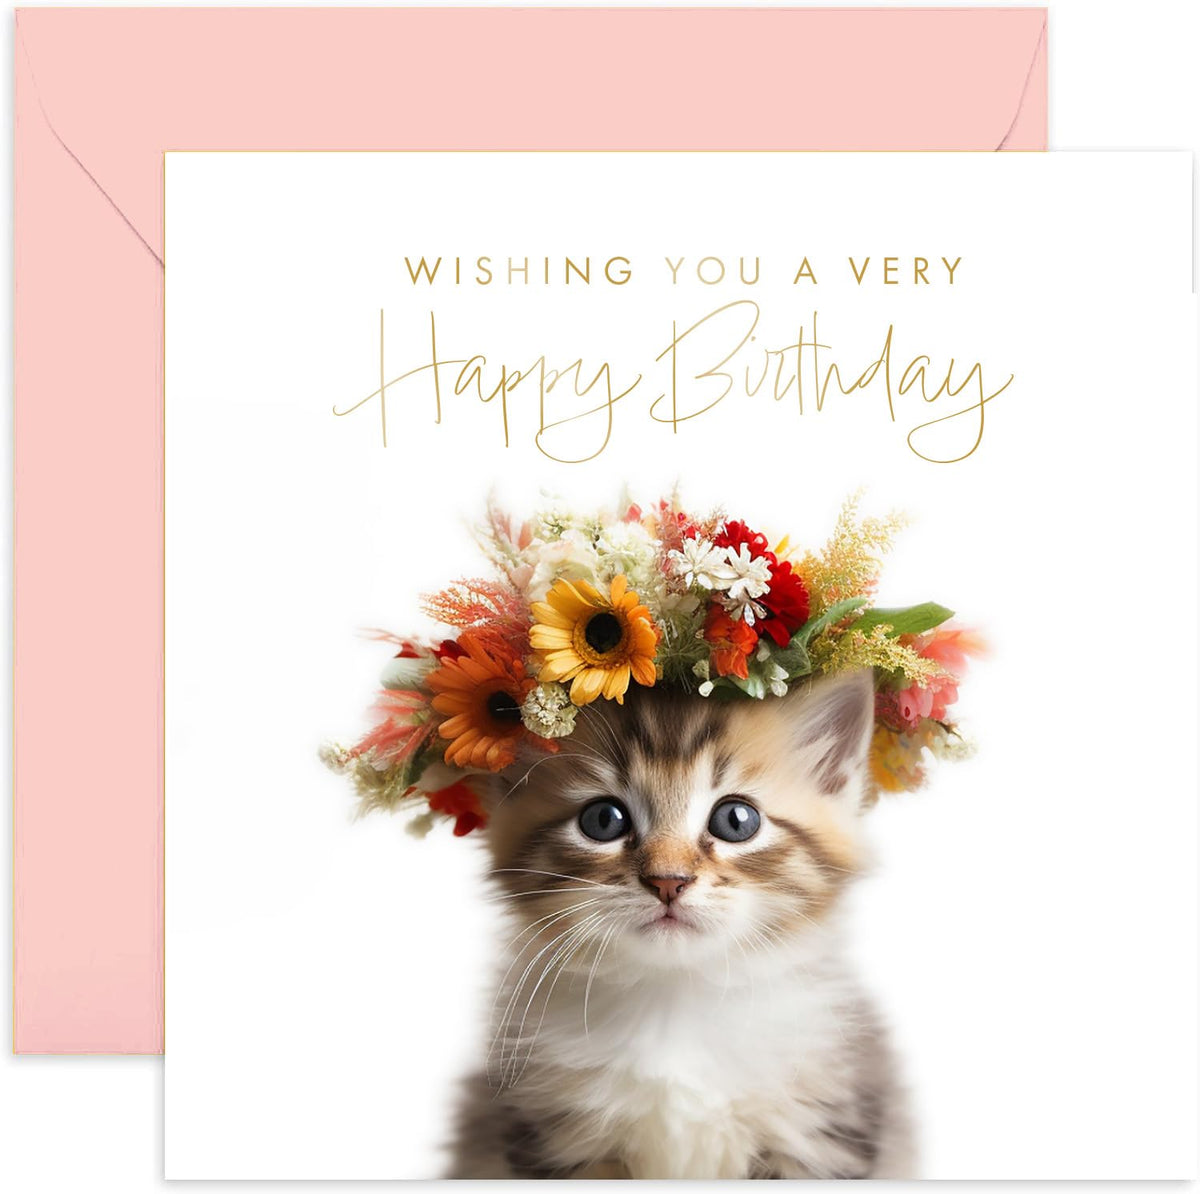 Old English Co. Baby Kitten Very Happy Birthday Card for Her - Cute Kitten Floral Birthday Card for Women - Cute Birthday Cards for Sister, Mum, Daughter, Friend   Blank Inside with Envelope…